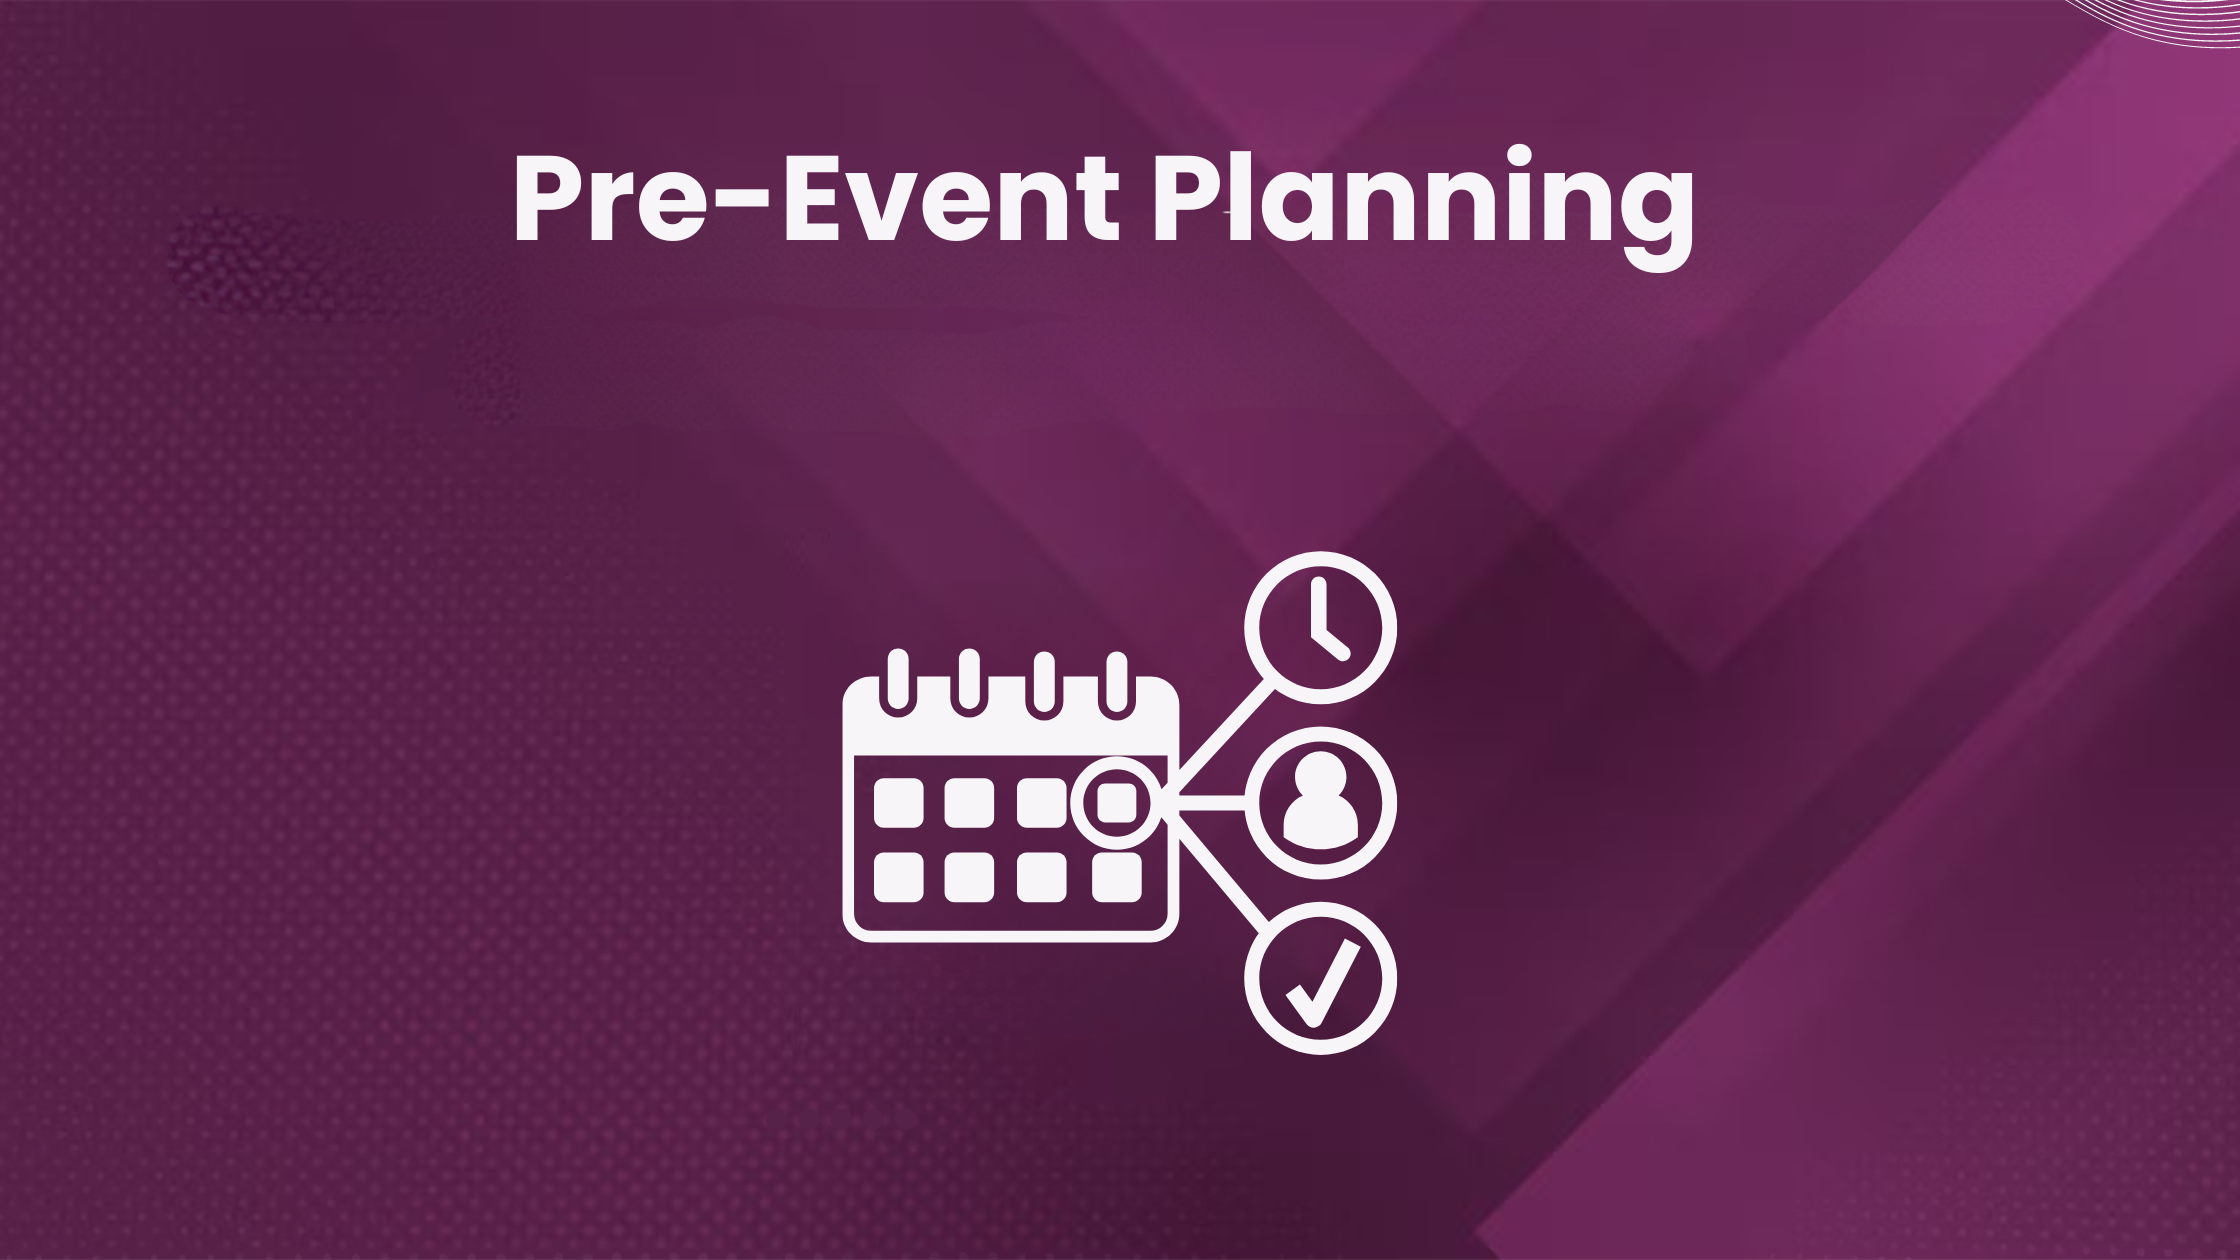 Pre-event planning